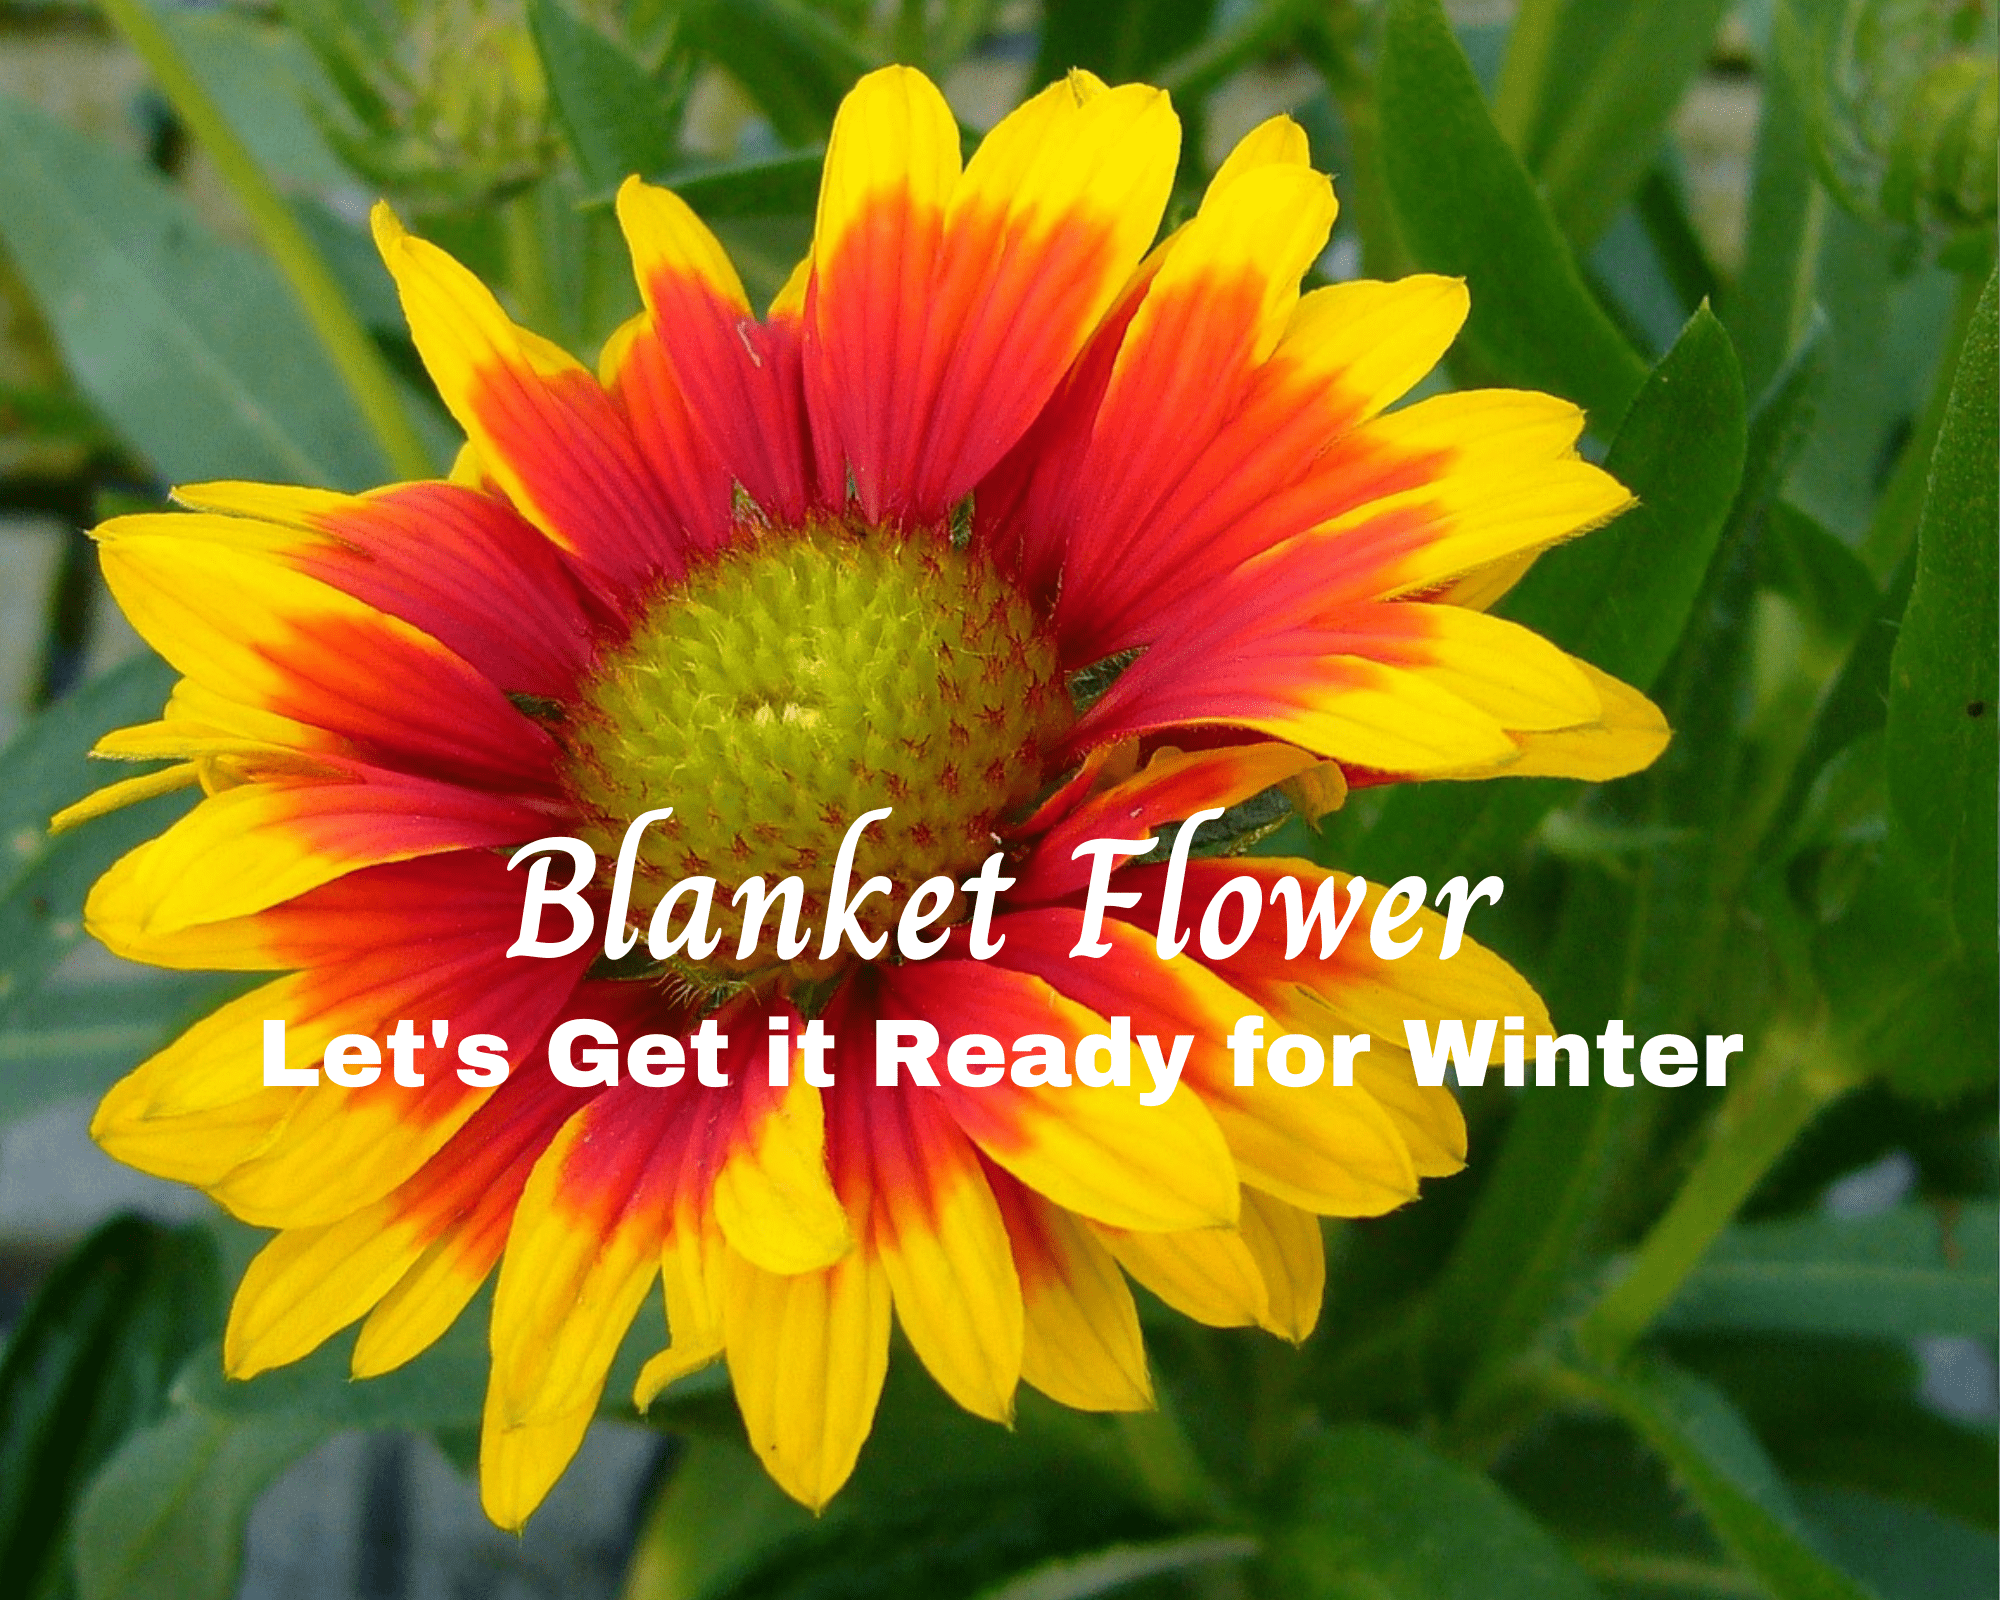 How to get your blanket flowers ready for cold weather